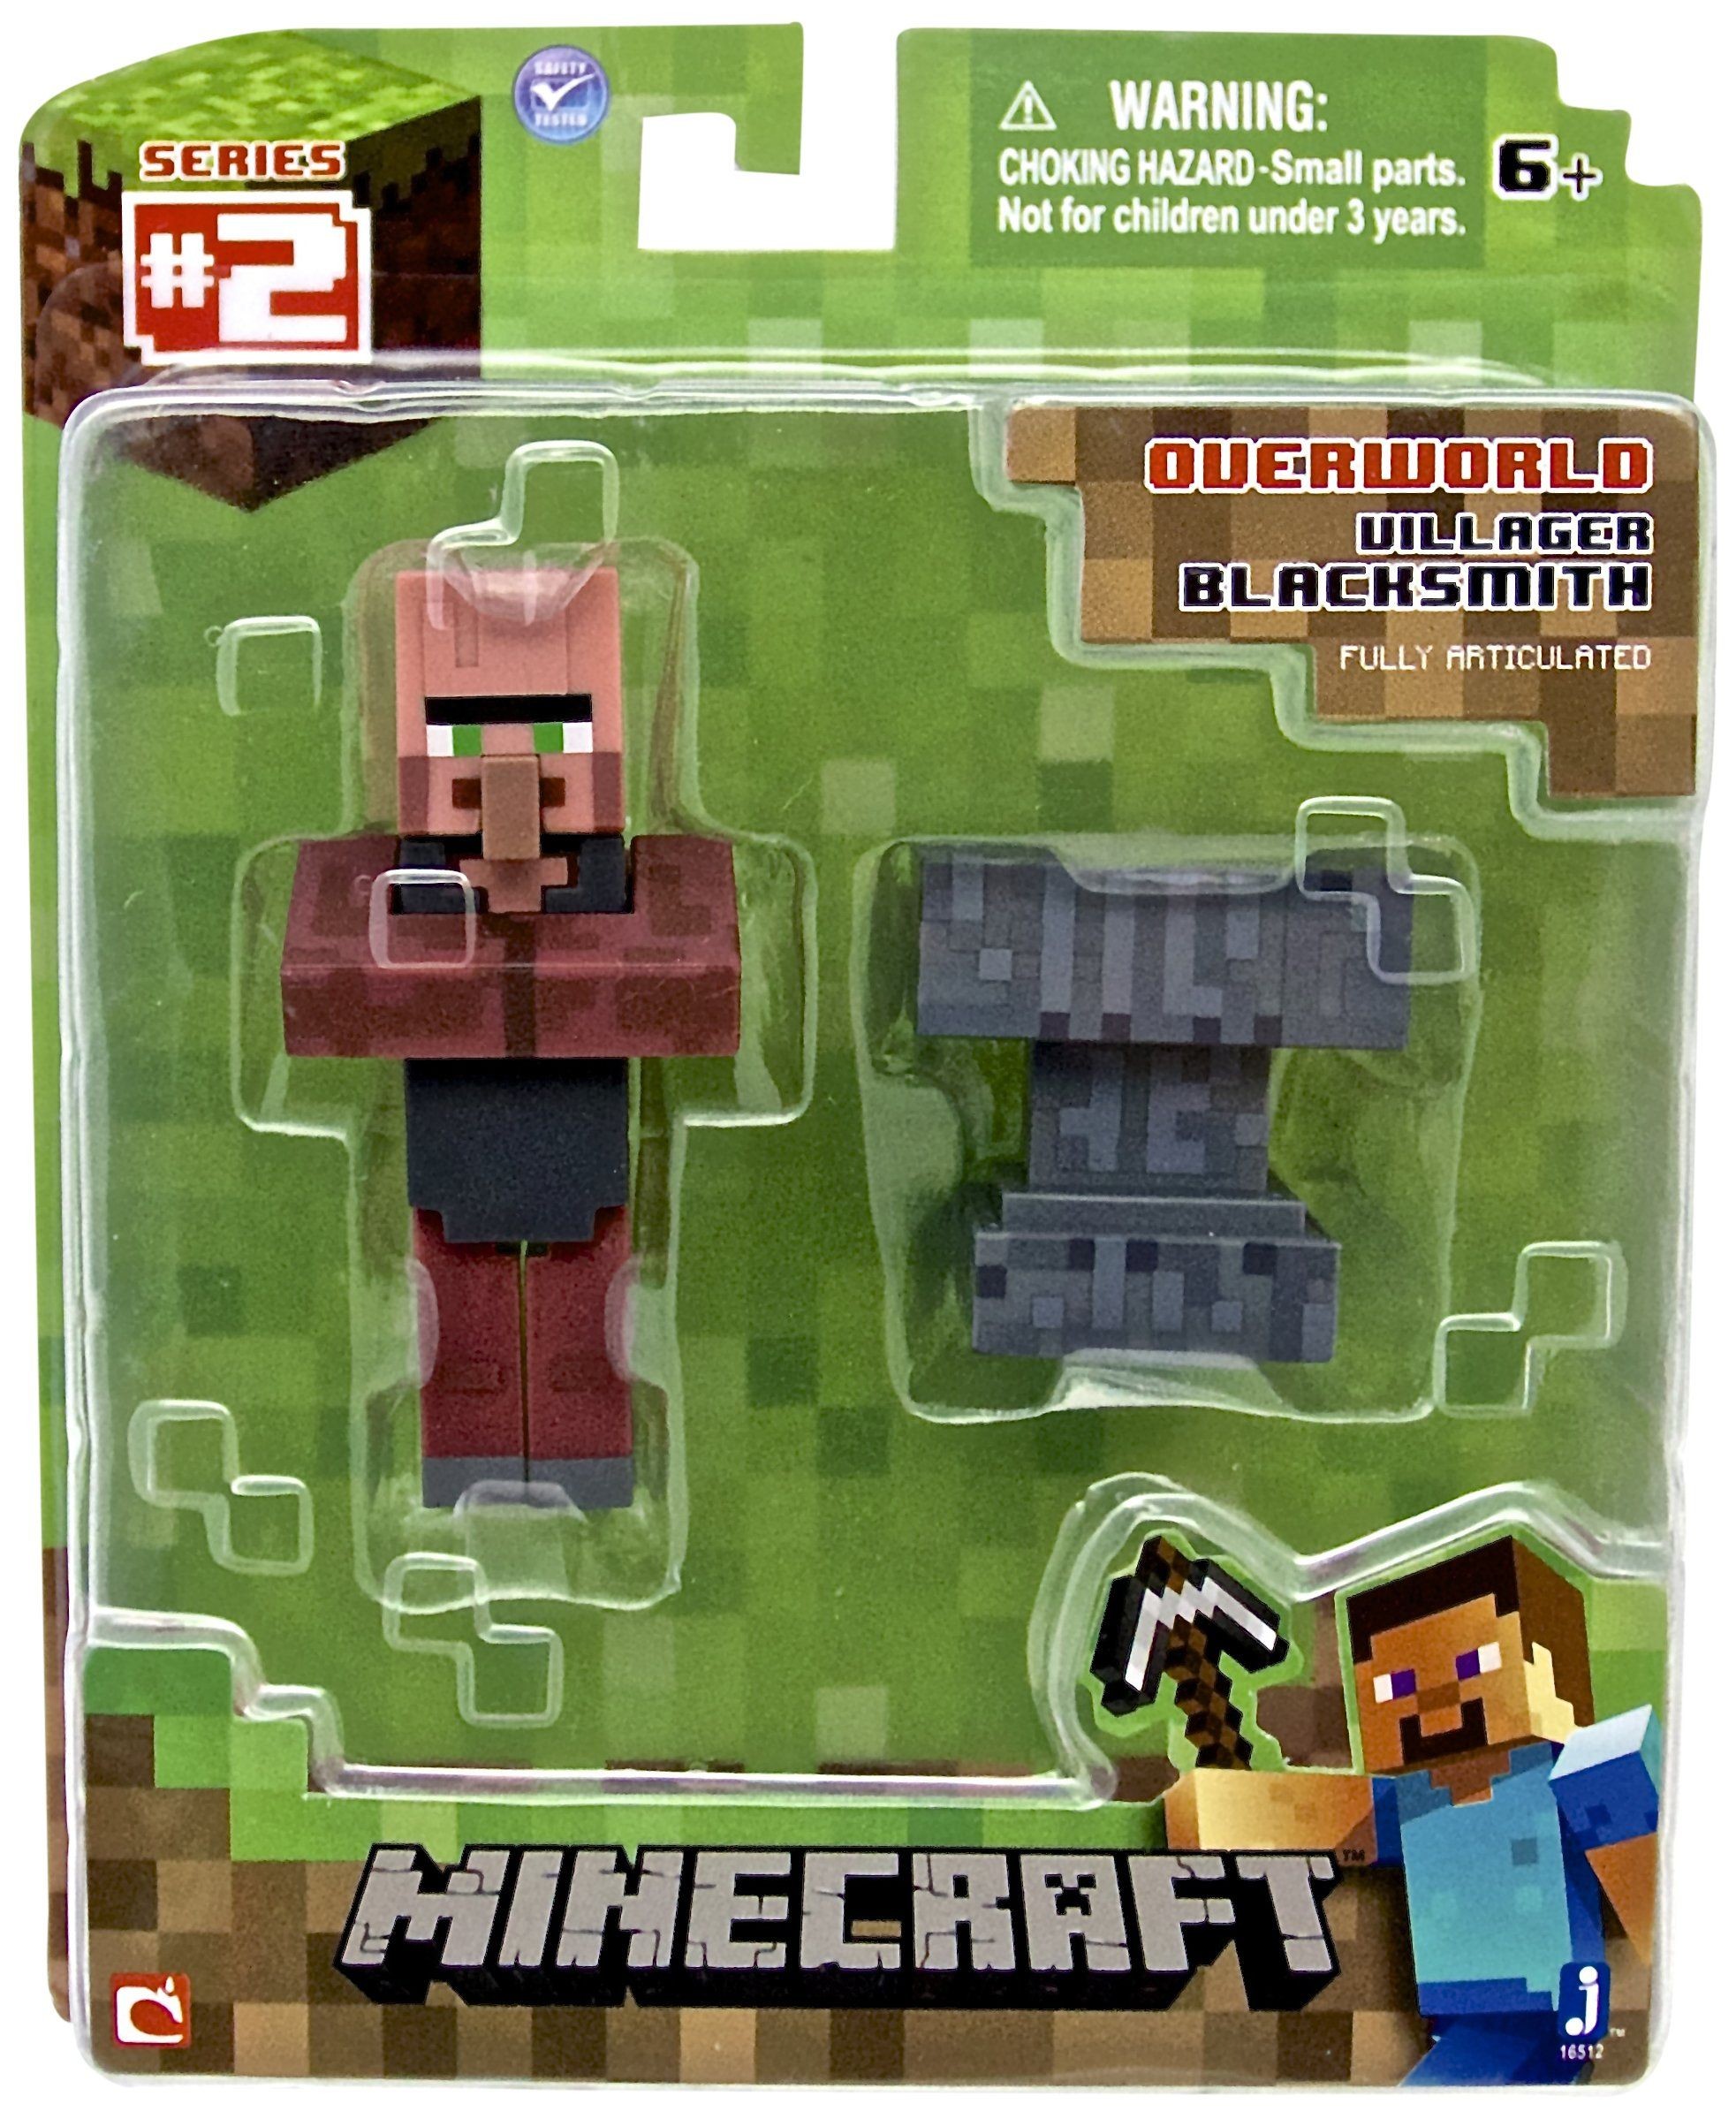 Minecraft Papercraft Deluxe Pack Minecraft Series 2 Blacksmith Villager with Accessory 3" Action